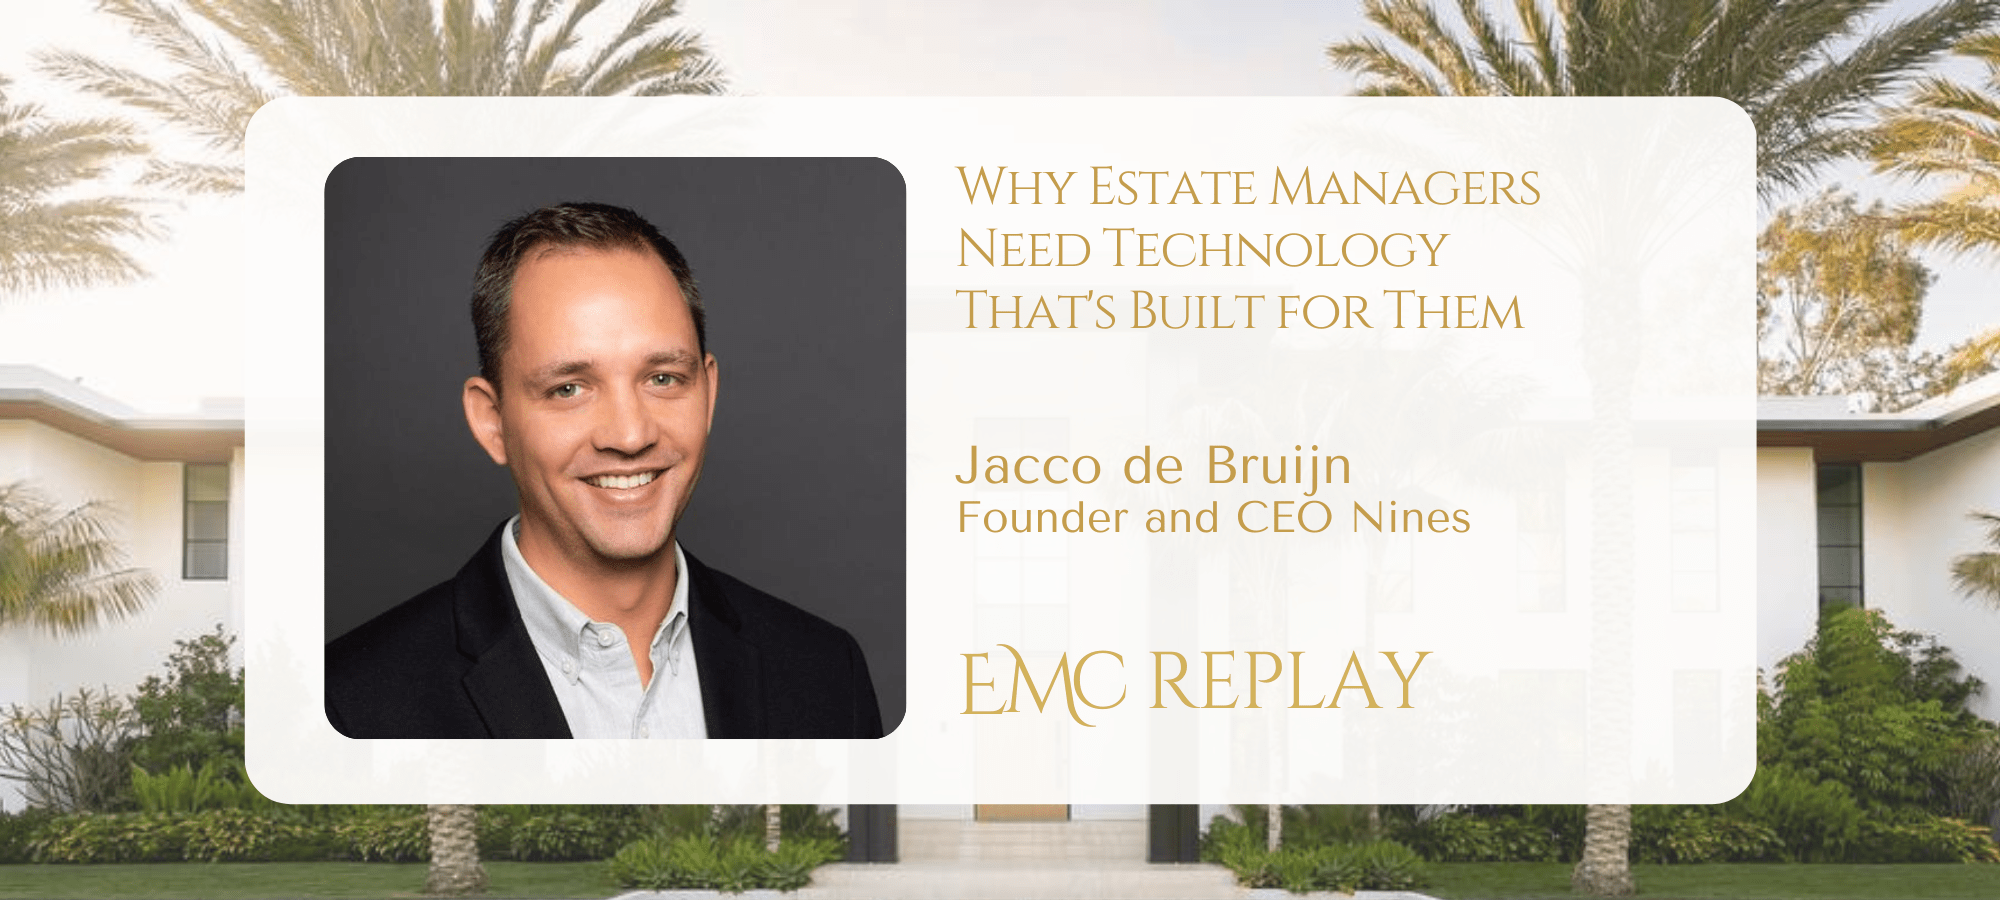 Why Estate Managers Need Technology That’s Built for Them